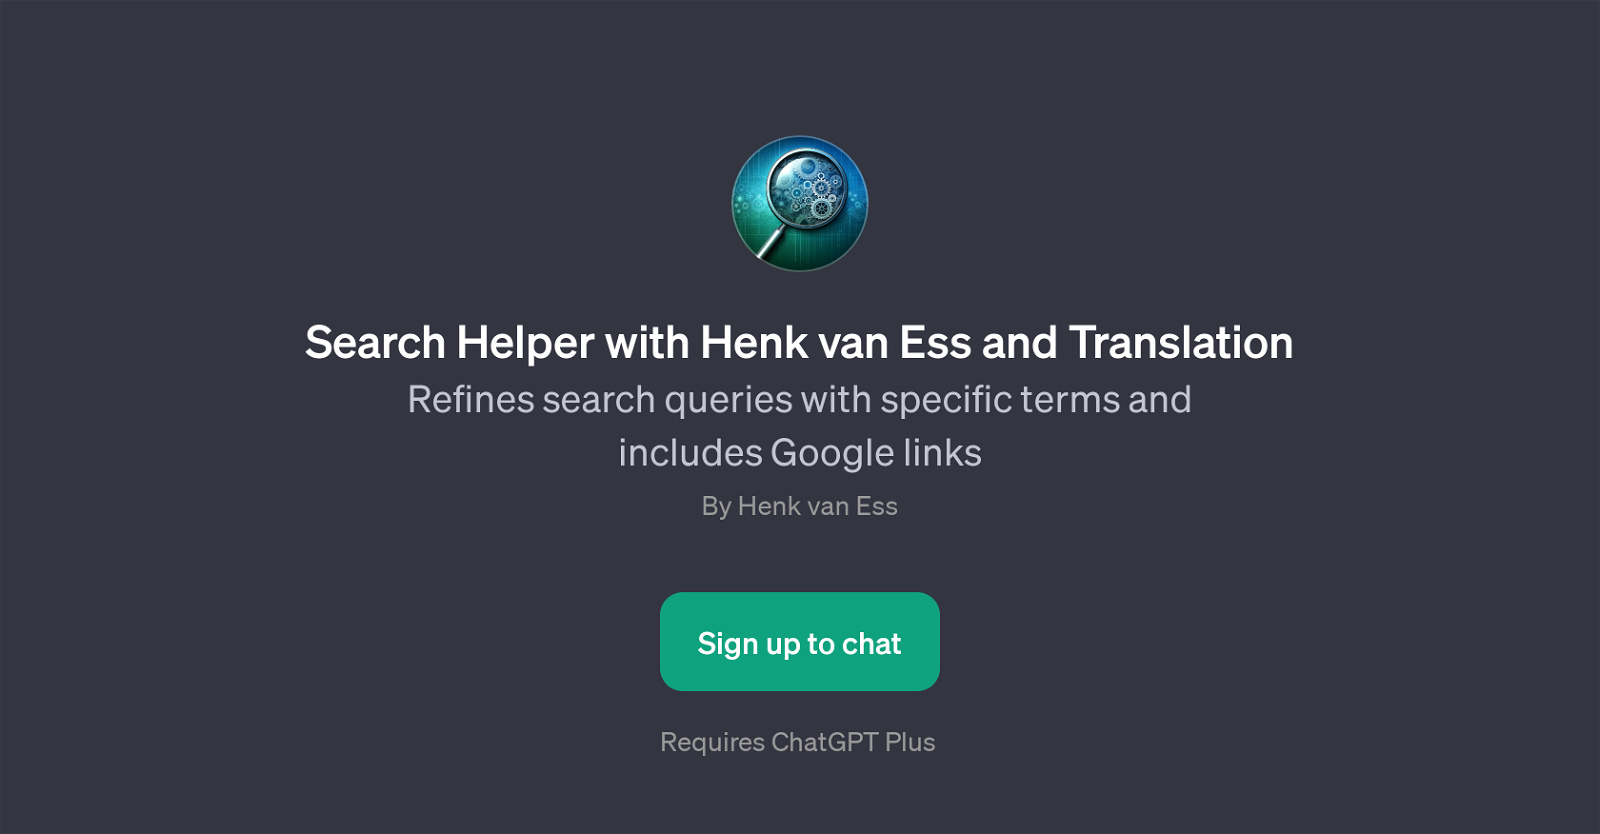 Search Helper with Henk van Ess and Translation website